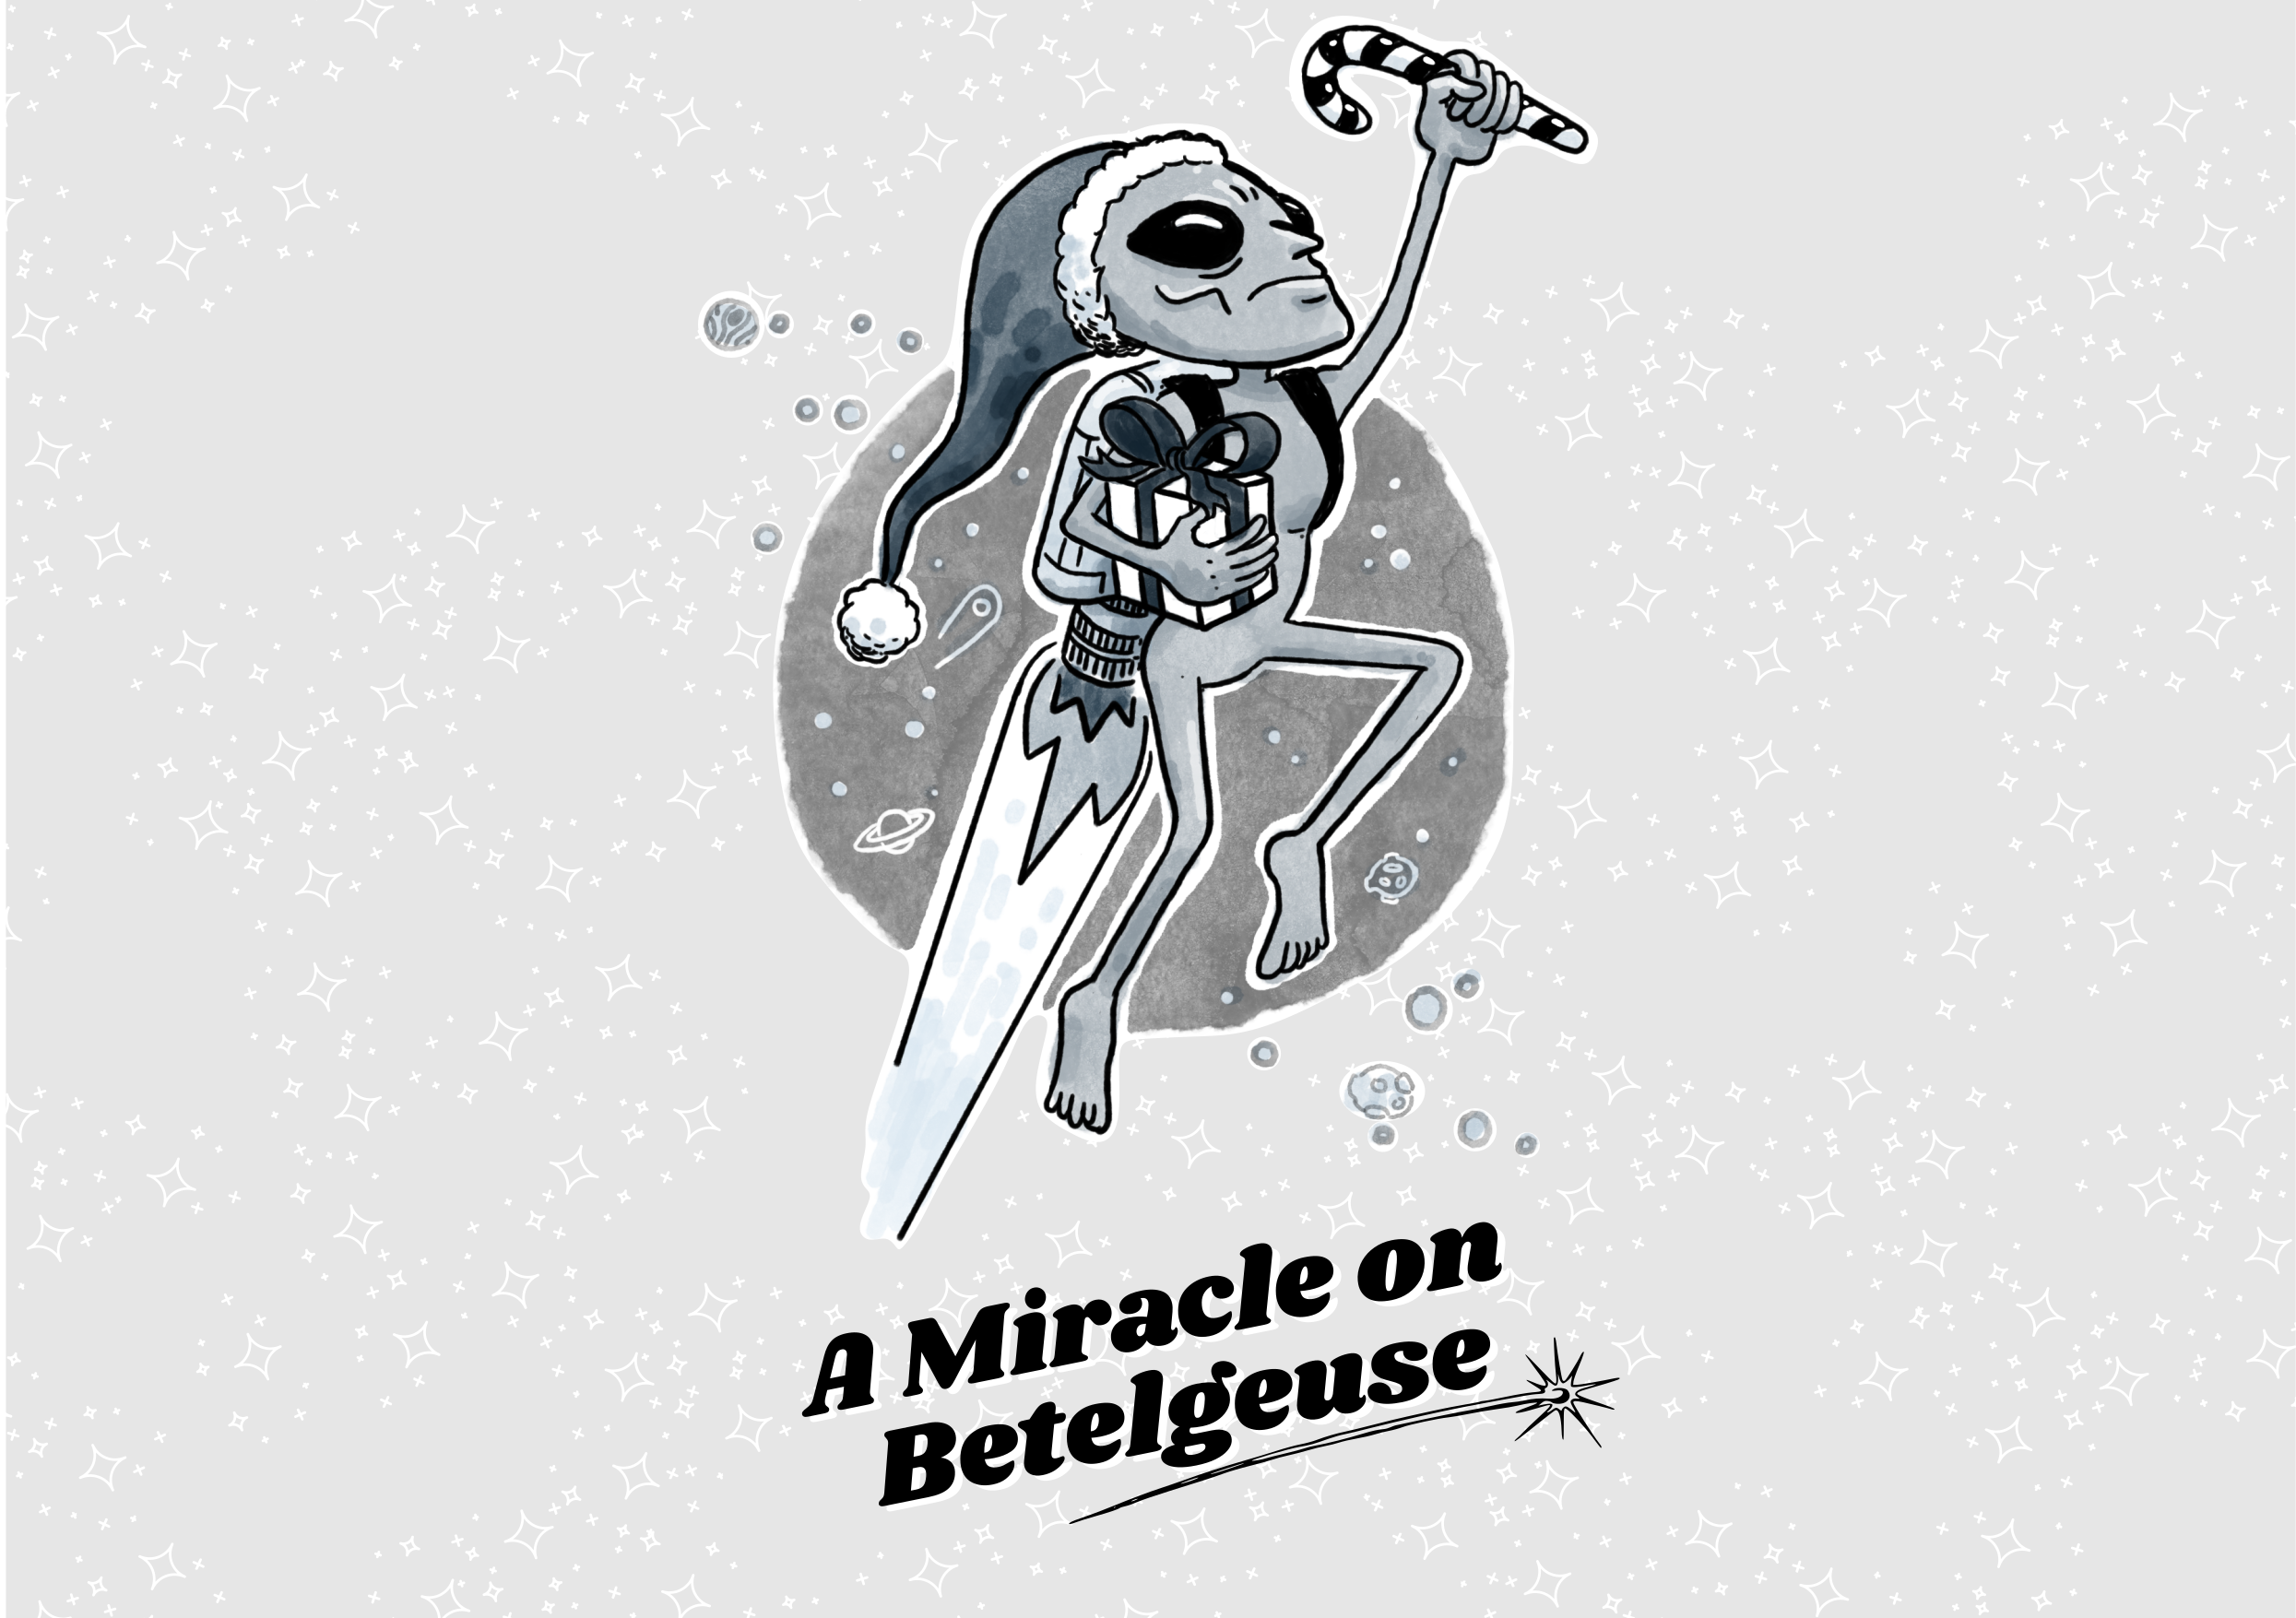 A Miracle on Betelgeuse